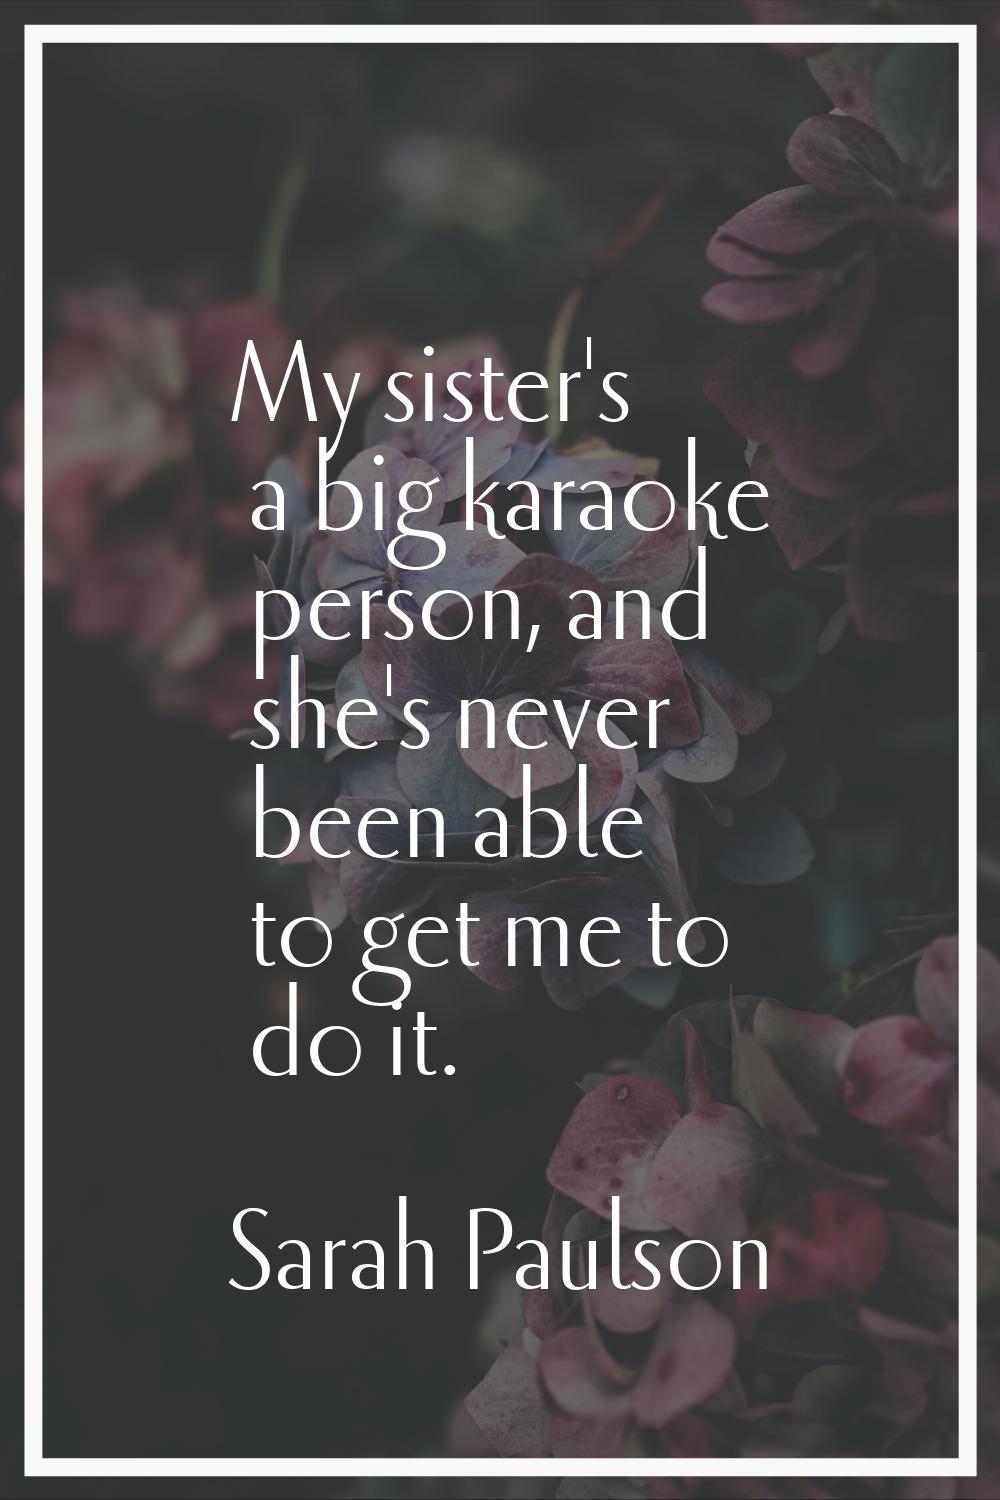 My sister's a big karaoke person, and she's never been able to get me to do it.